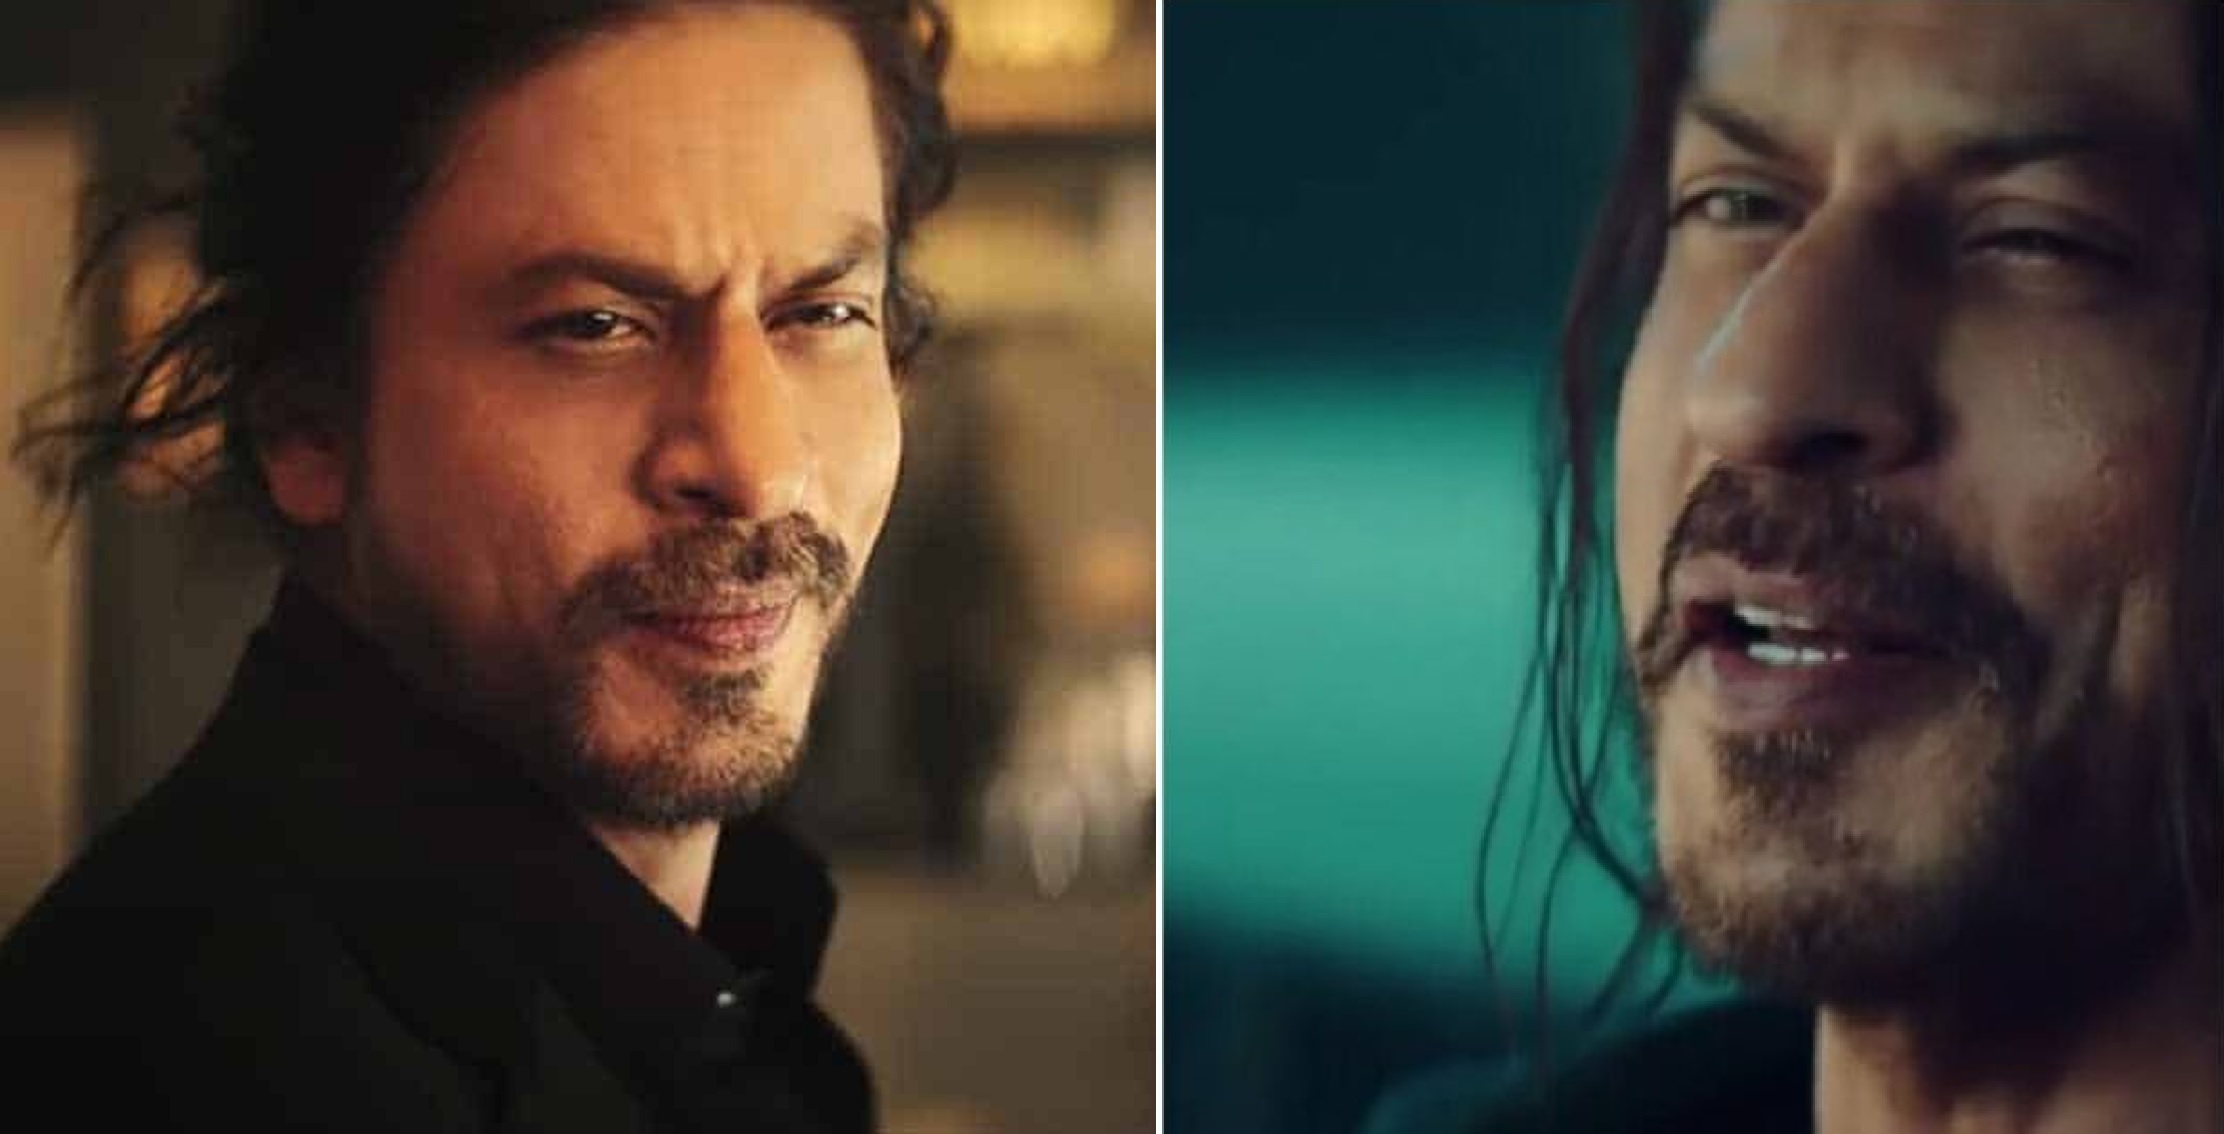 He's Back! Shah Rukh Khan Debuts NEW LOOK From Pathan For Thums Up Ad